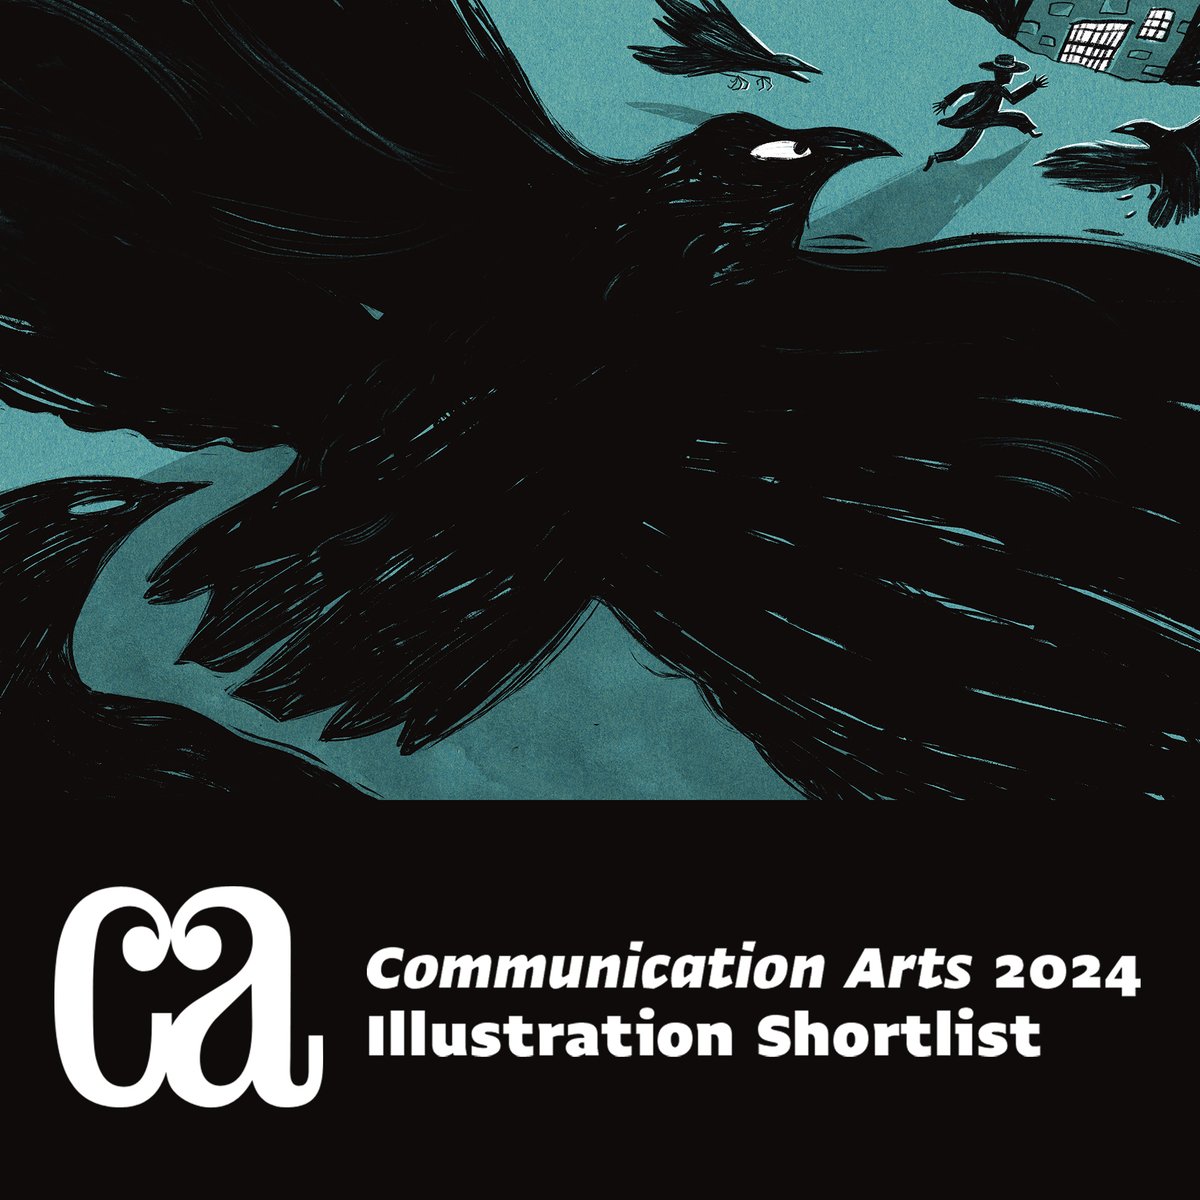 Happy to share that my illustrations for @HistoryExtra have made it to the @CommArts 2024 Illustration Shortlist! Thanks AD @SuseFrank for the opportunity and this year's jury! #shanecluskey #illustrator #illustration @IllustrationZo1